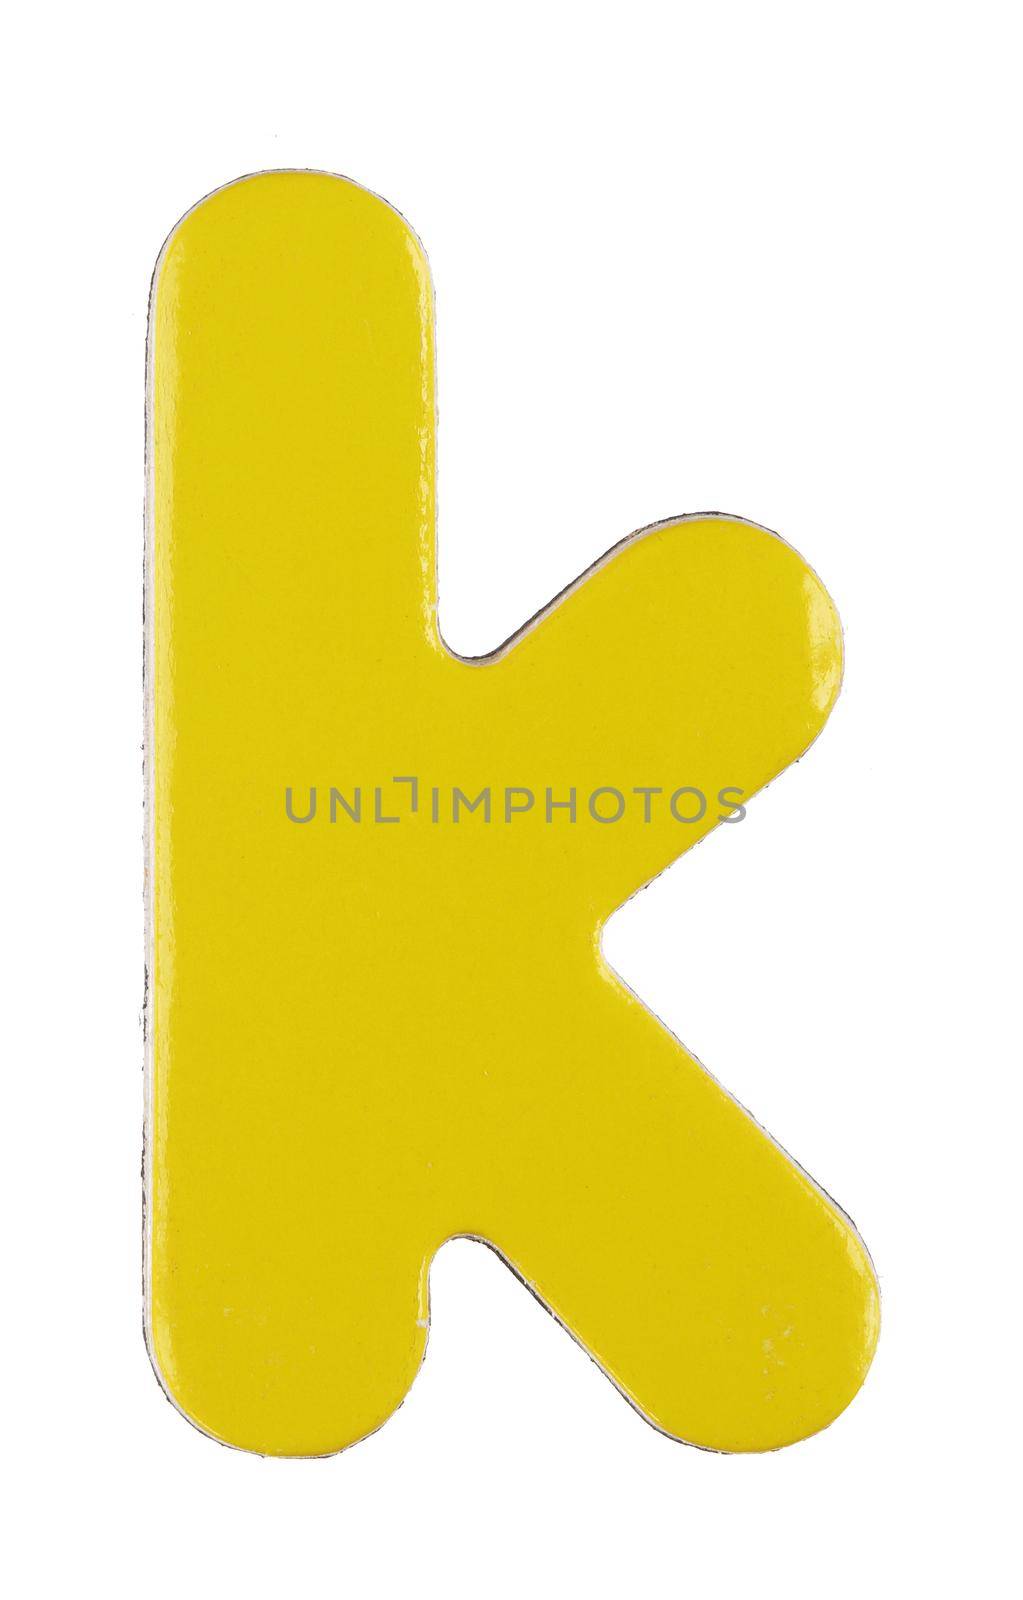 lower case k magnetic letter on white with clipping path by VivacityImages